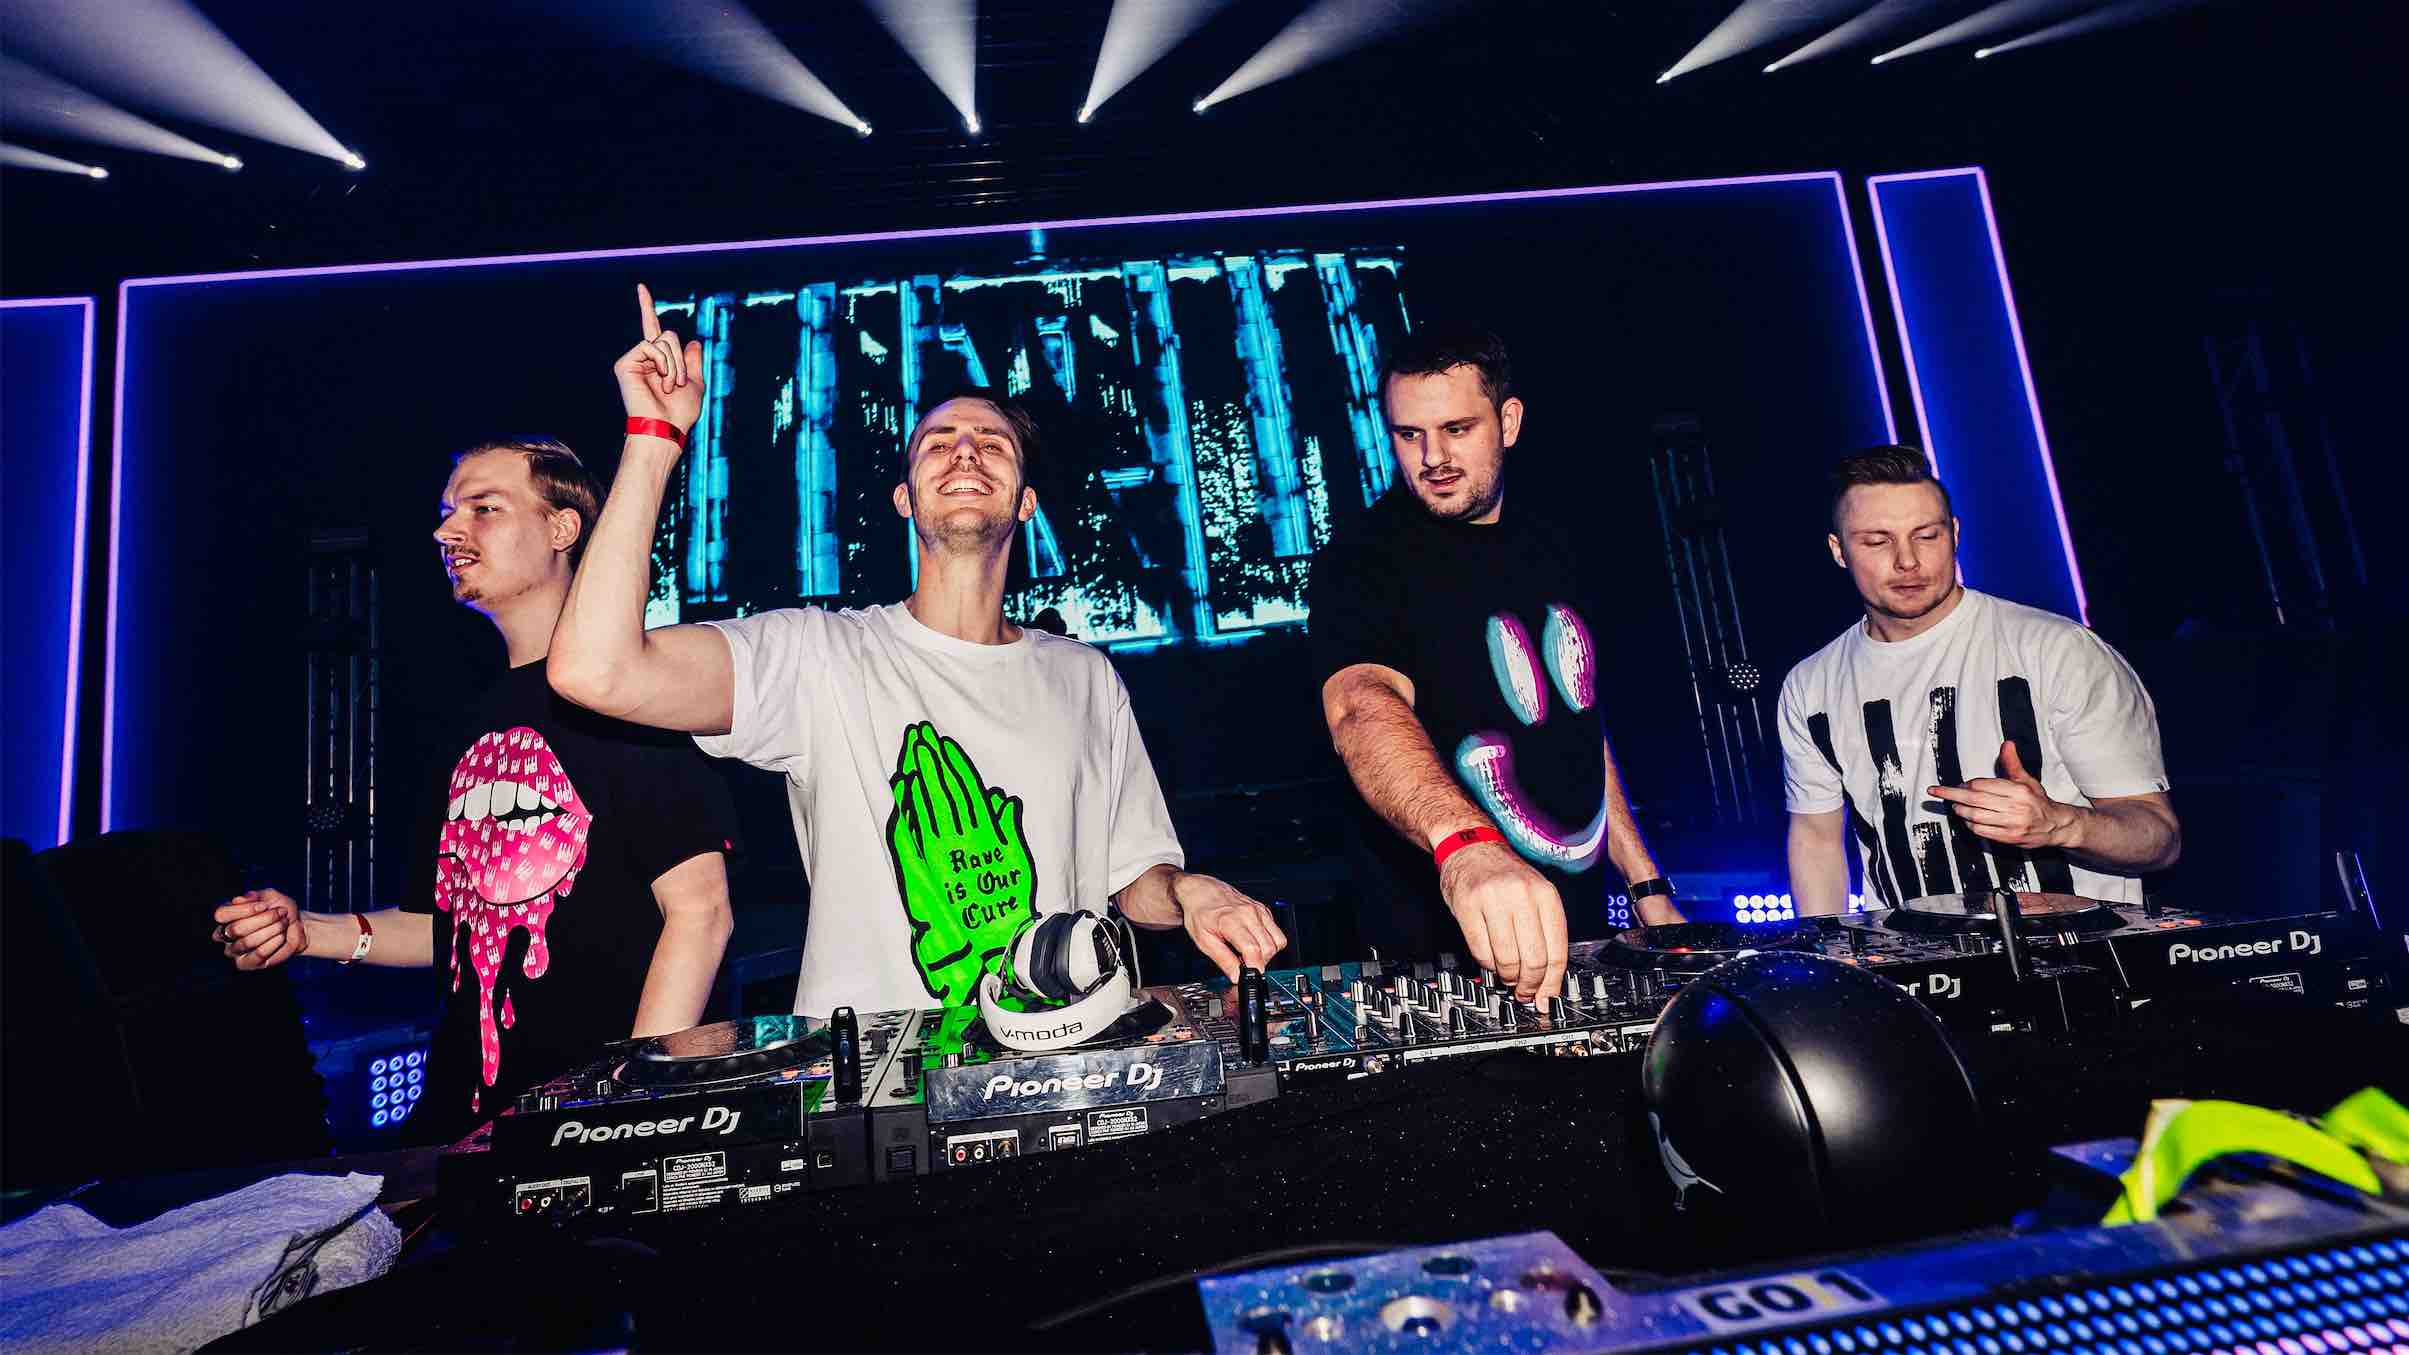 W&W x AXMO Performing Live wearing Rave Culture Lips, Rave Is Our Cure, Smiley and White Rave Culture Emblem T-Shirts